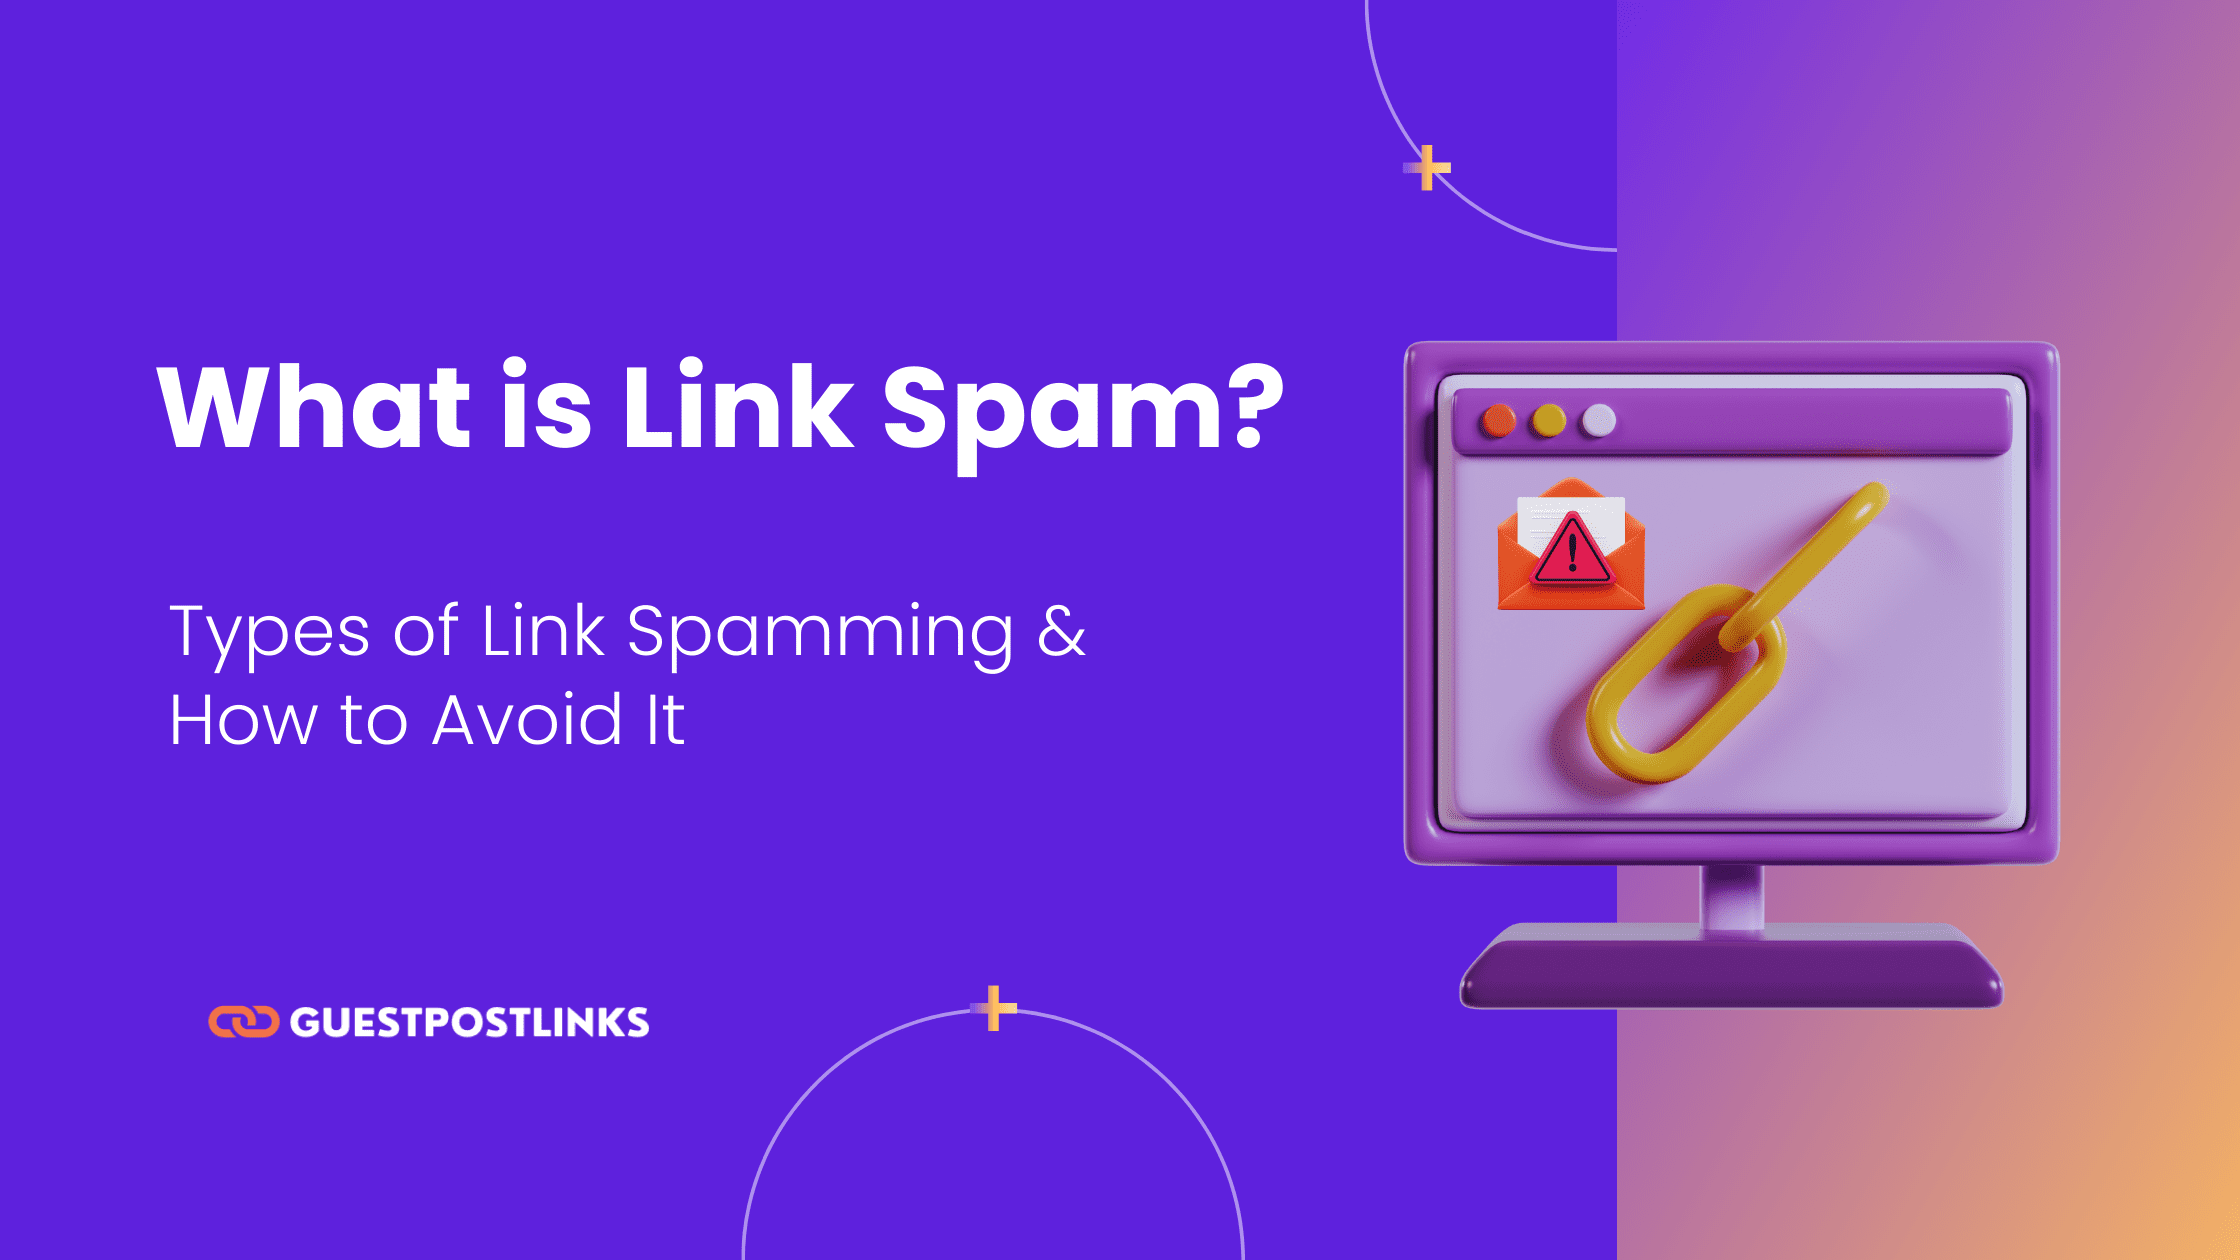 What is Link Spam